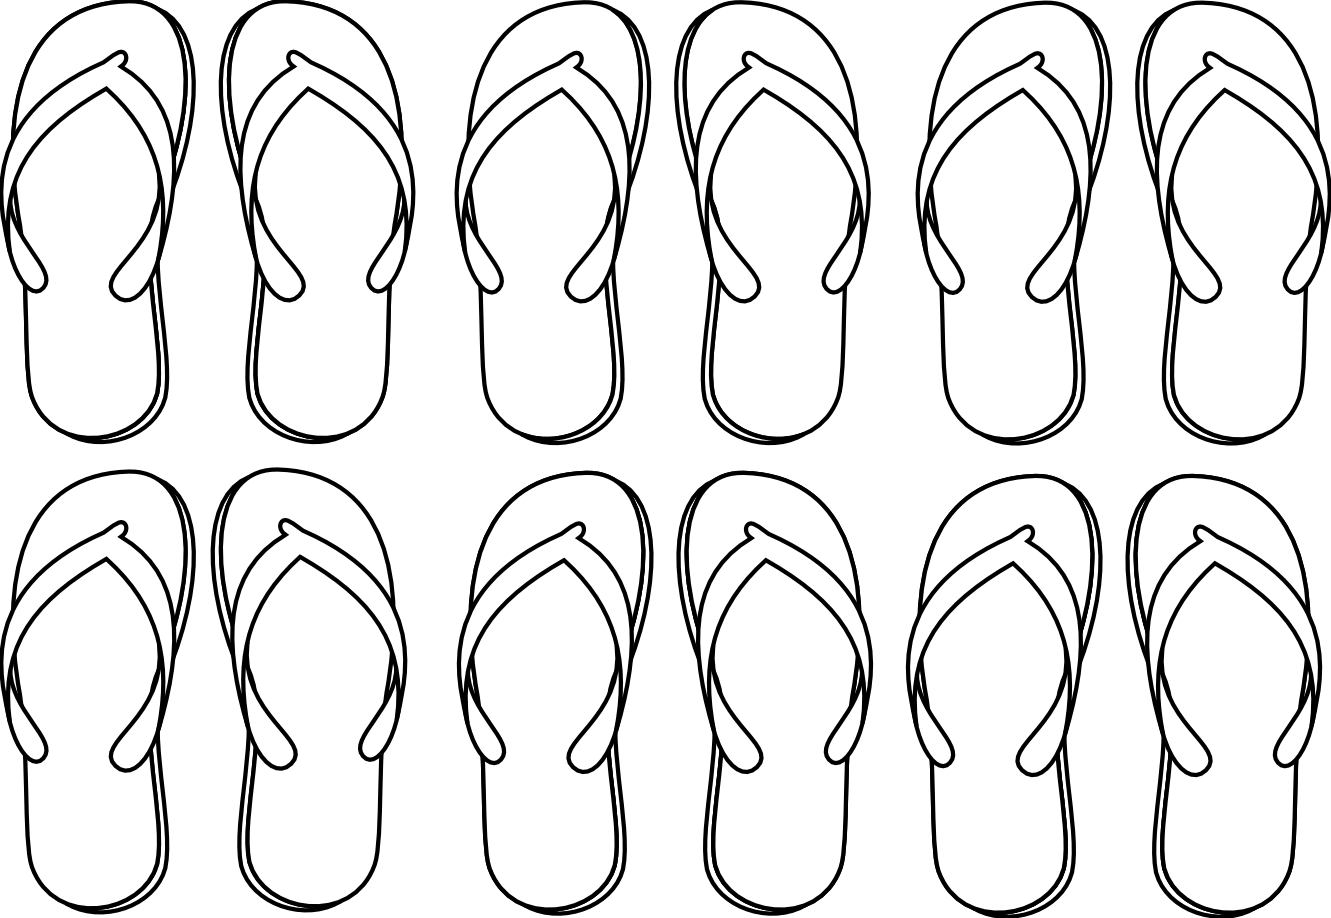 Flip Flops - Coloring Pages for Kids and for Adults